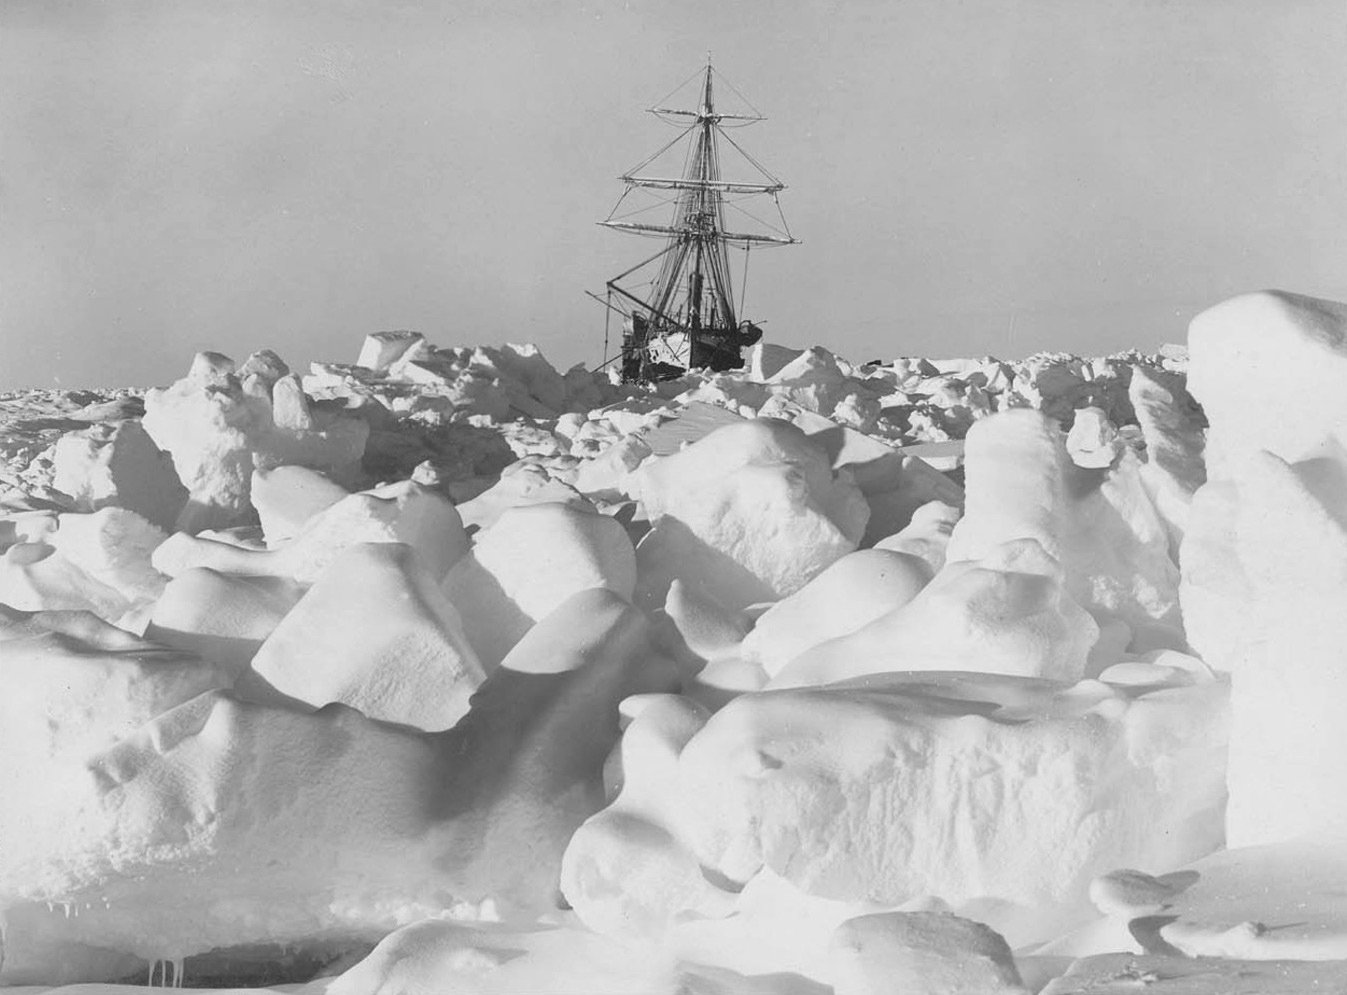 January 1915 - Endurance trapped in pack ice